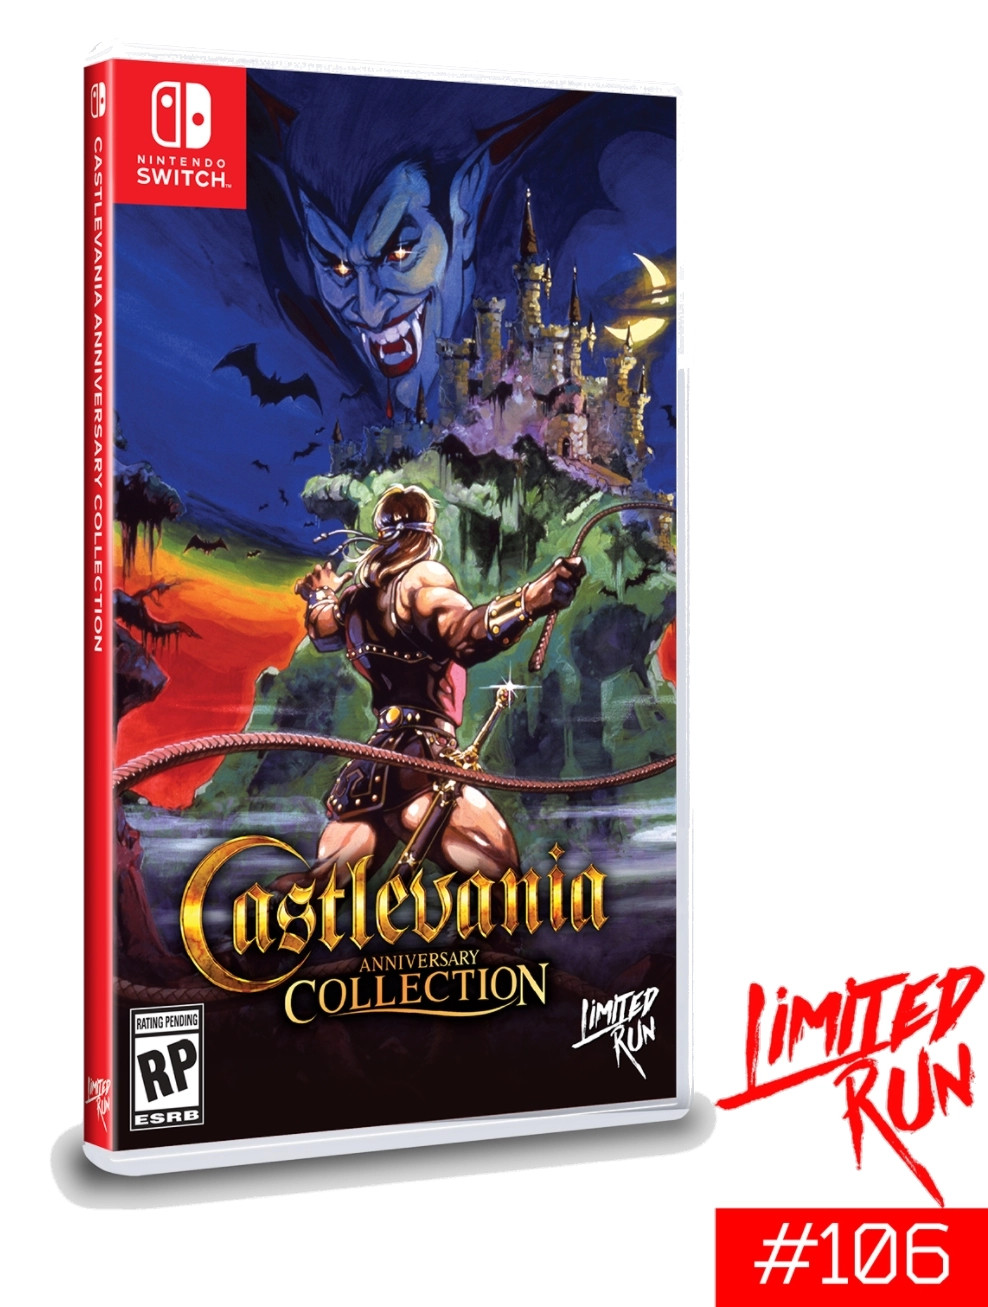 Castlevania - Anniversary Collection (Limited Run Games)